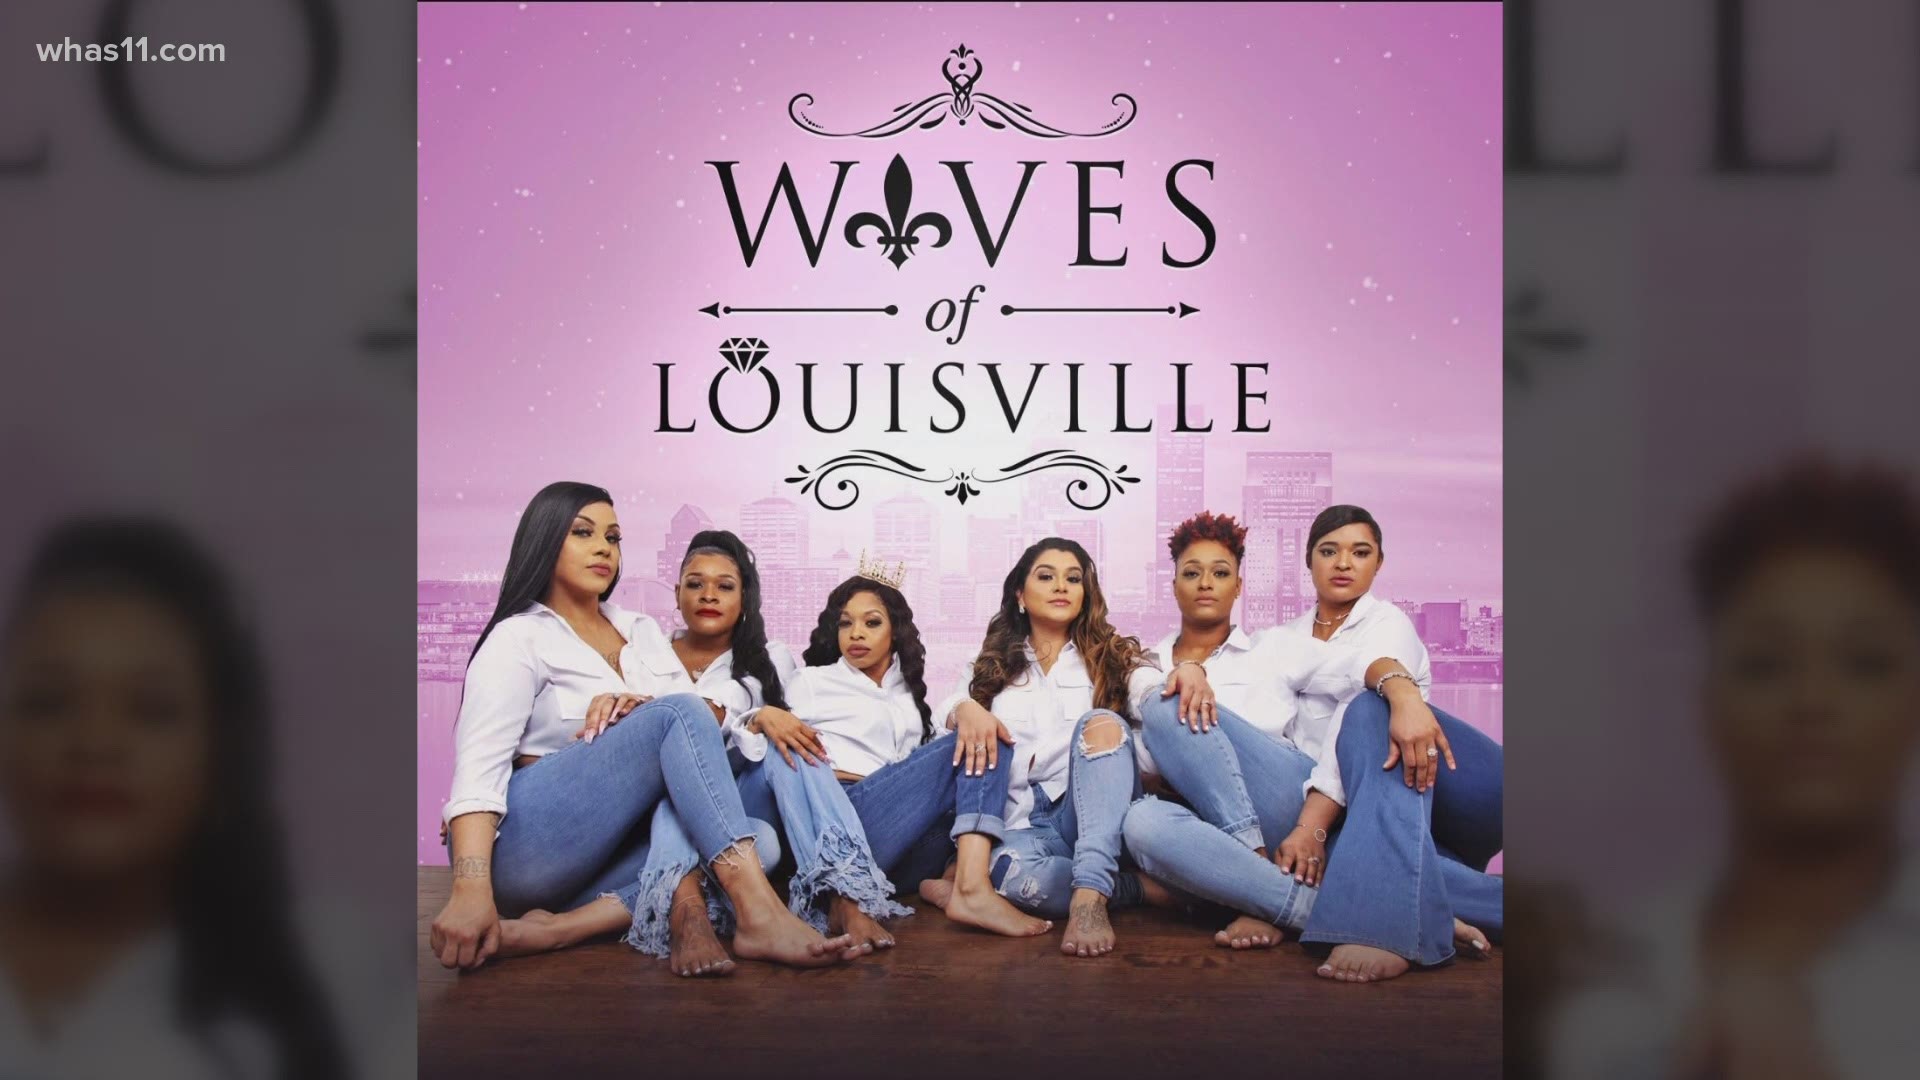 "Wives of Louisville" will tackle issues like family and relationships while showcasing some of the great things Louisville has to offer.